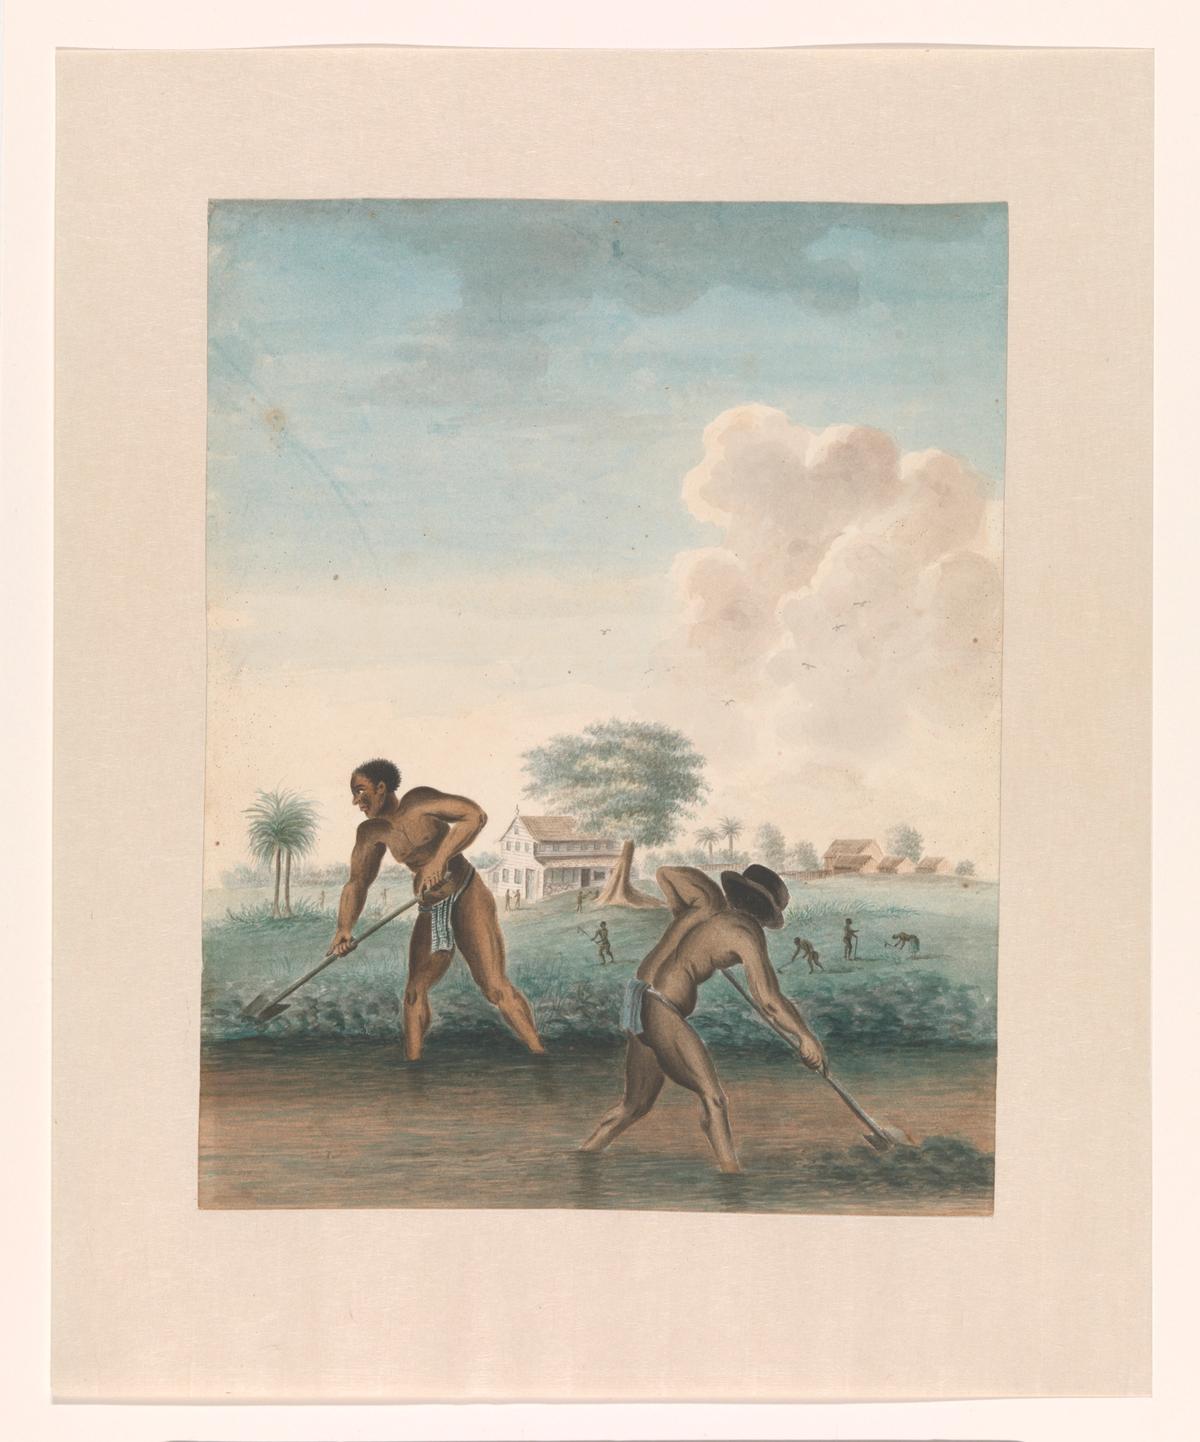 Enslaved man working on the fields by an unknown artist (around 1850) Courtesy of the Rijksmuseum. Purchased with support from the Johan Huizinga Fonds/ Rijksmuseum Fonds